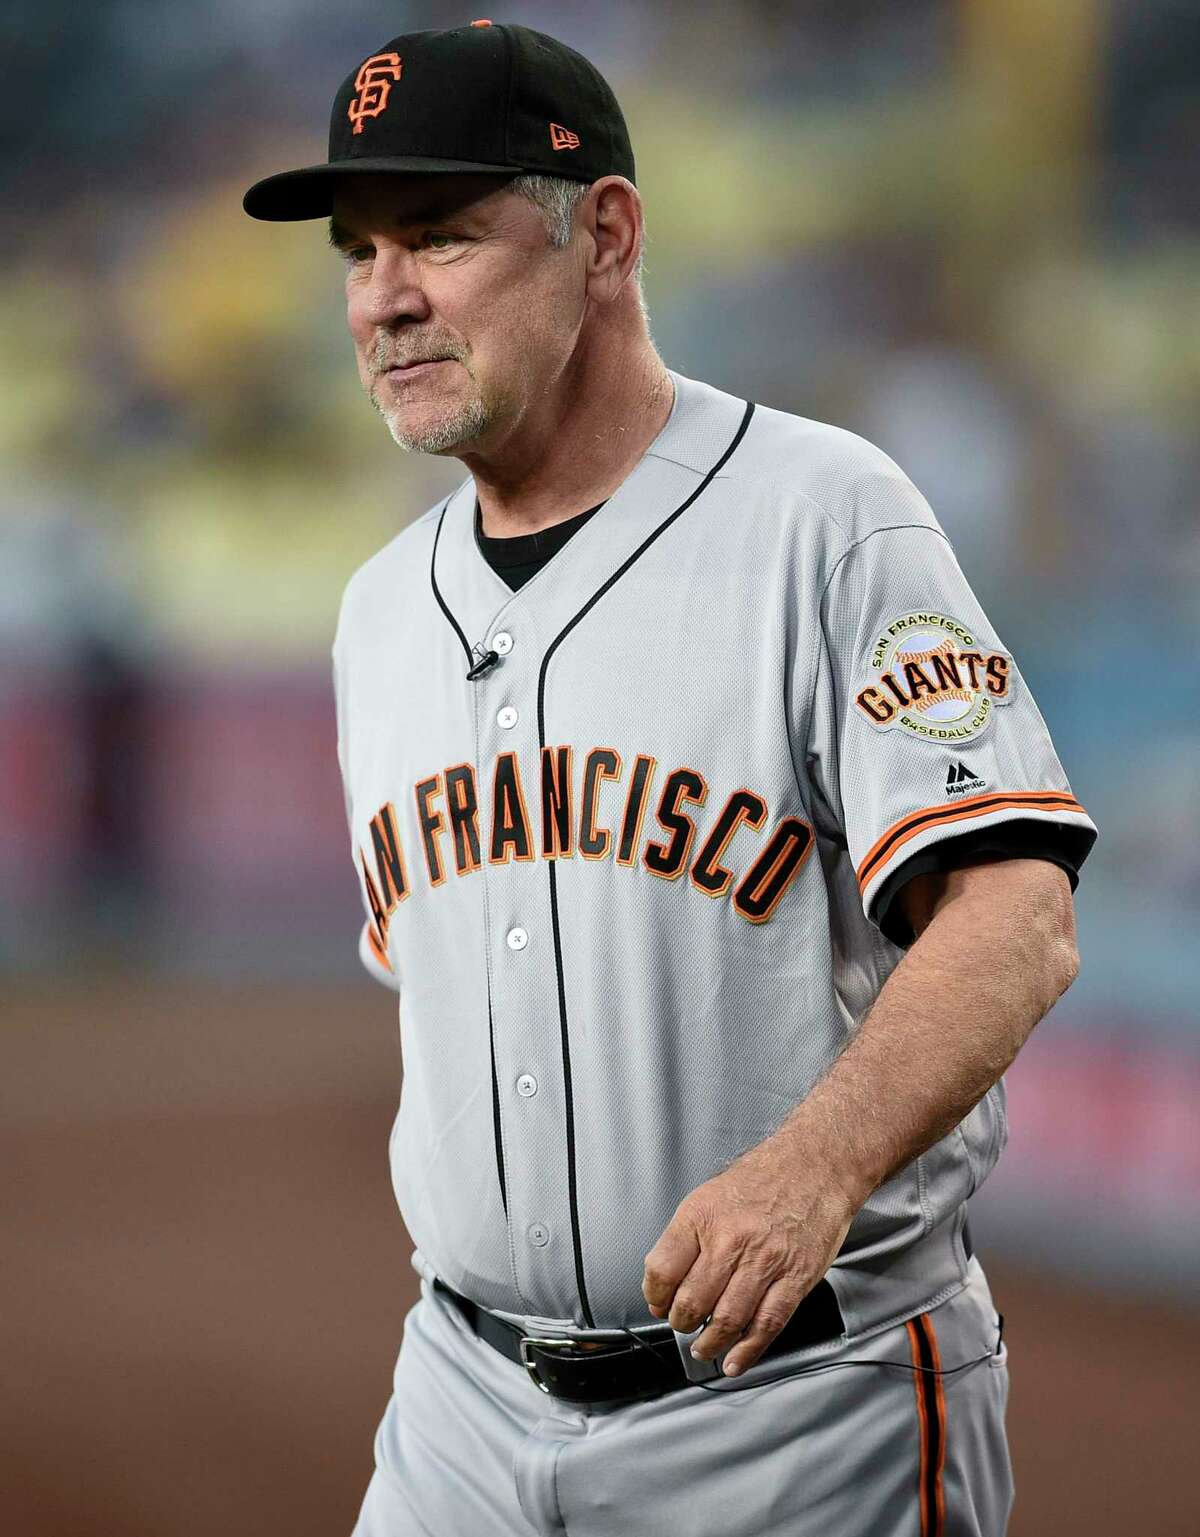 FILE - San Francisco Giants manager Bruce Bochy walks onto the field prior to a baseball game against the Los Angeles Dodgers in Los Angeles, Friday, Sept. 6, 2019. The Texas Rangers have hired Bruce Bochy as their new manager, bringing the three-time World Series champion out of retirement to take over a team that has had six consecutive losing seasons. Texas made the surprise announcement Friday, Oct. 21, 2022, just more than two weeks after its season ended.